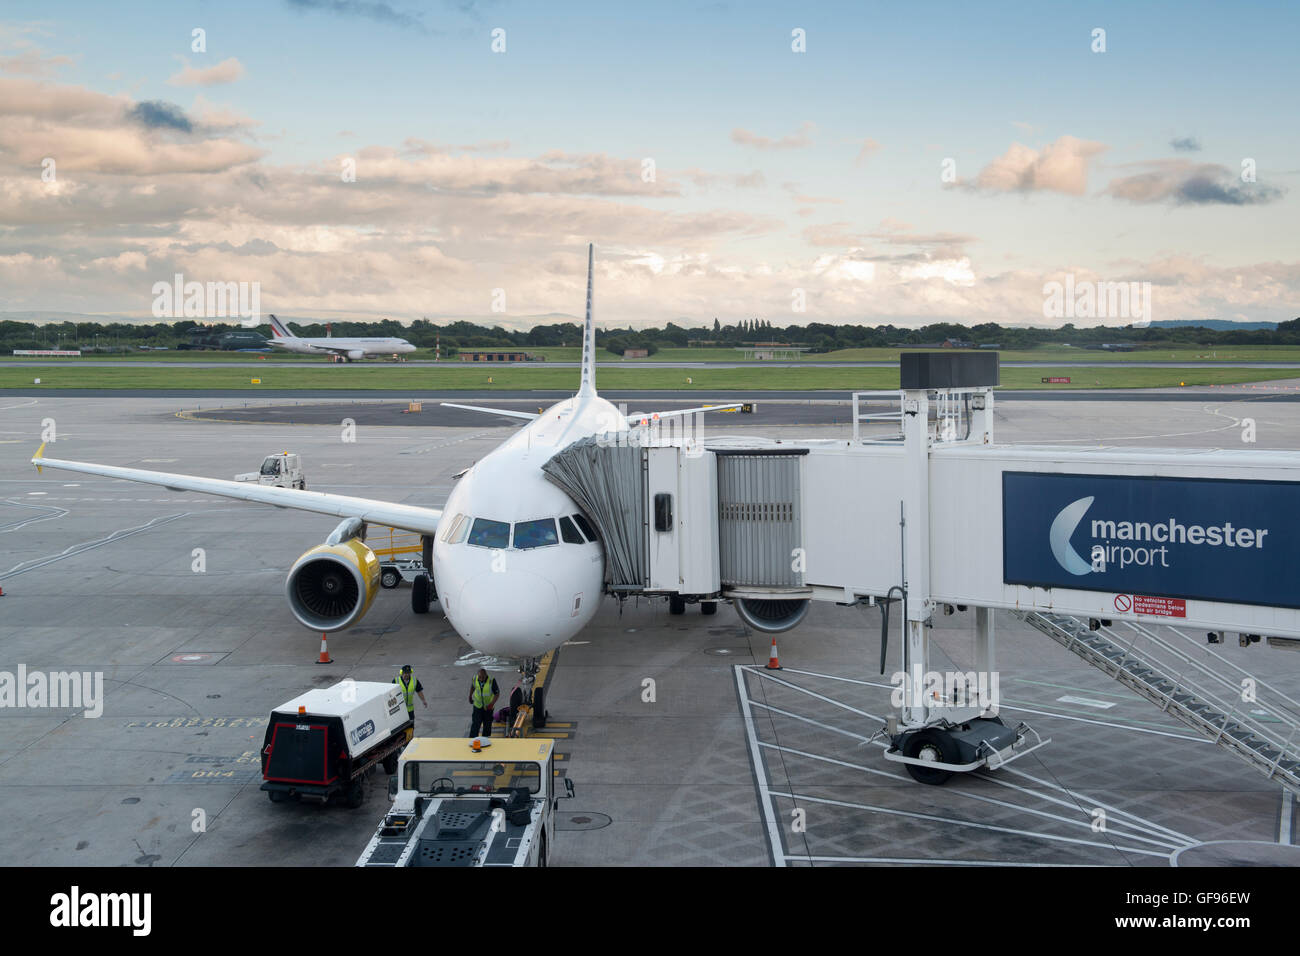 An airliner is stationery on the apron of Manchester Airport while passengers board and luggage is loaded (Editorial use only). Stock Photo